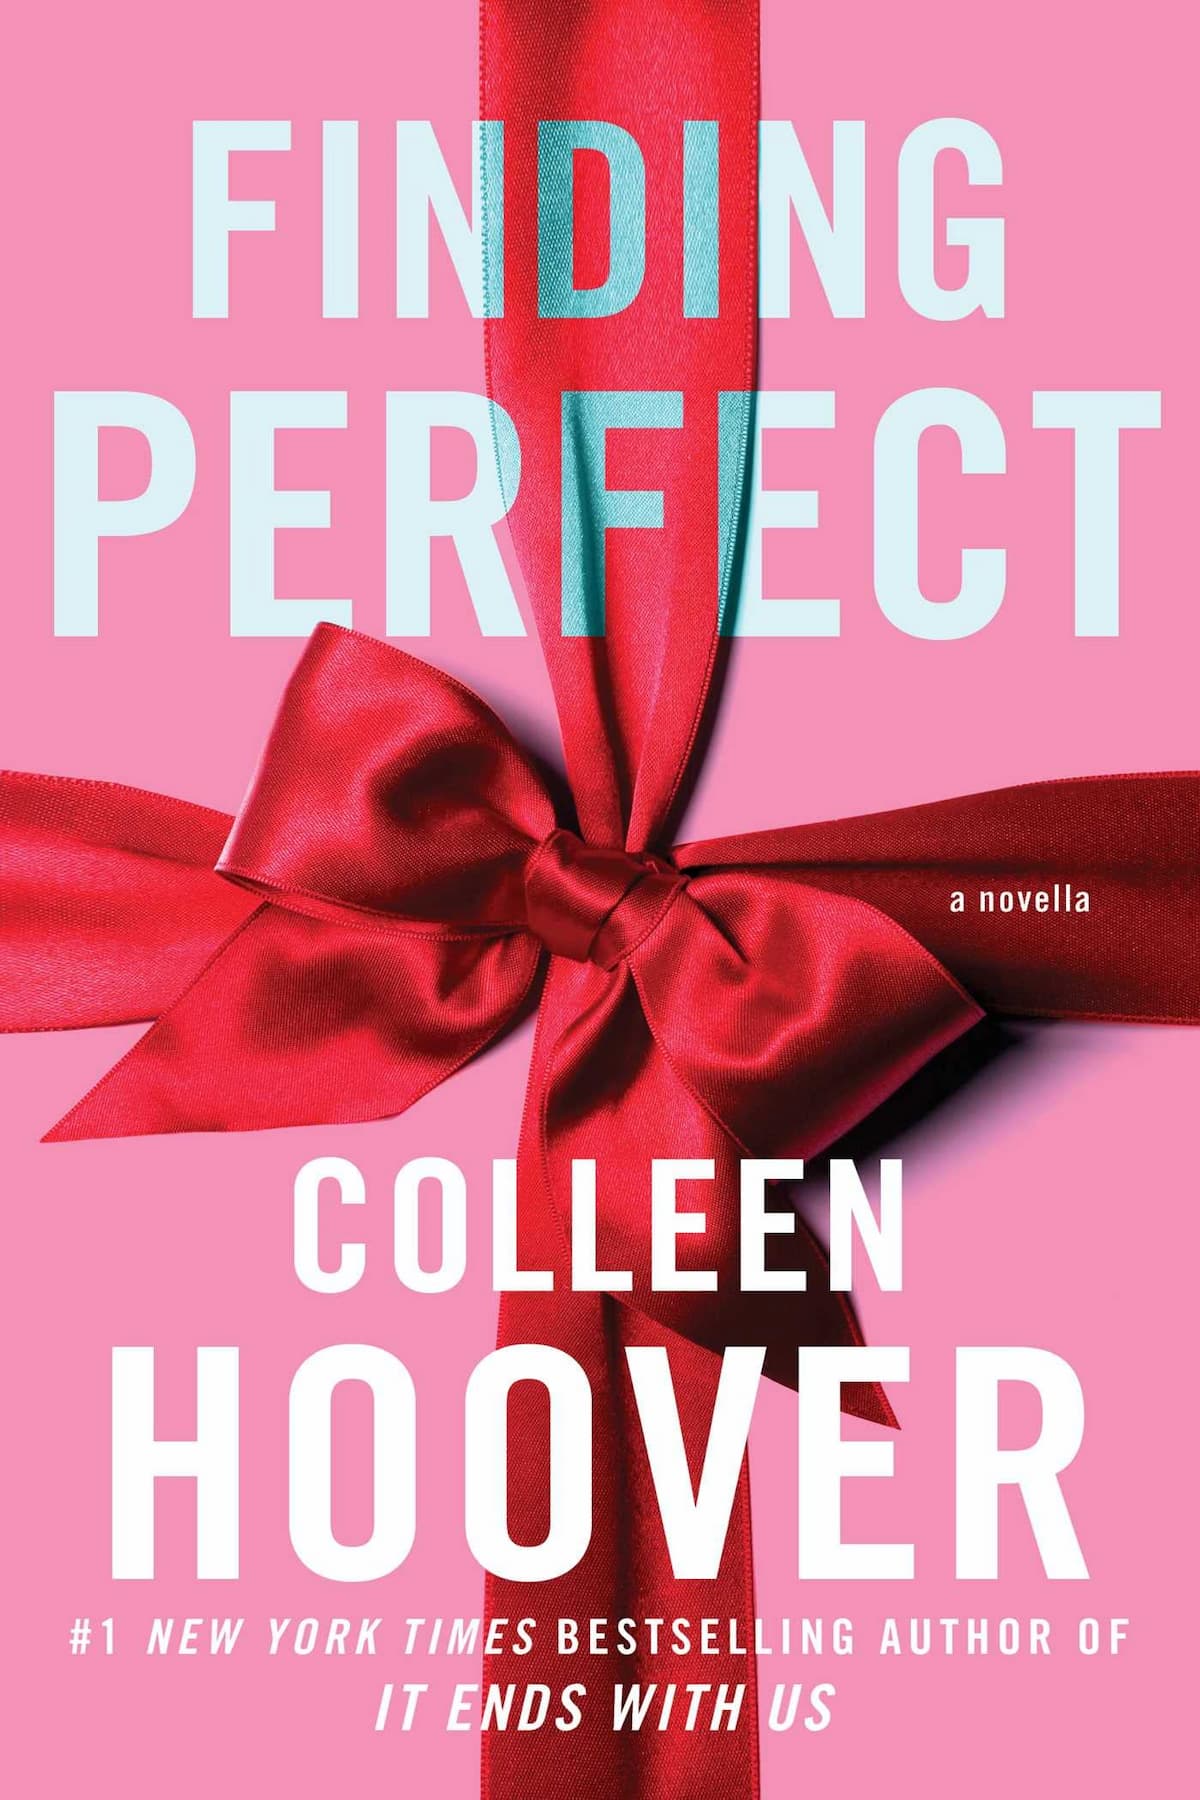 Colleen Hoover Books In Order, Contemporary Romance, Fiction, Hopeless Books In Order, Hopeless series, Romance